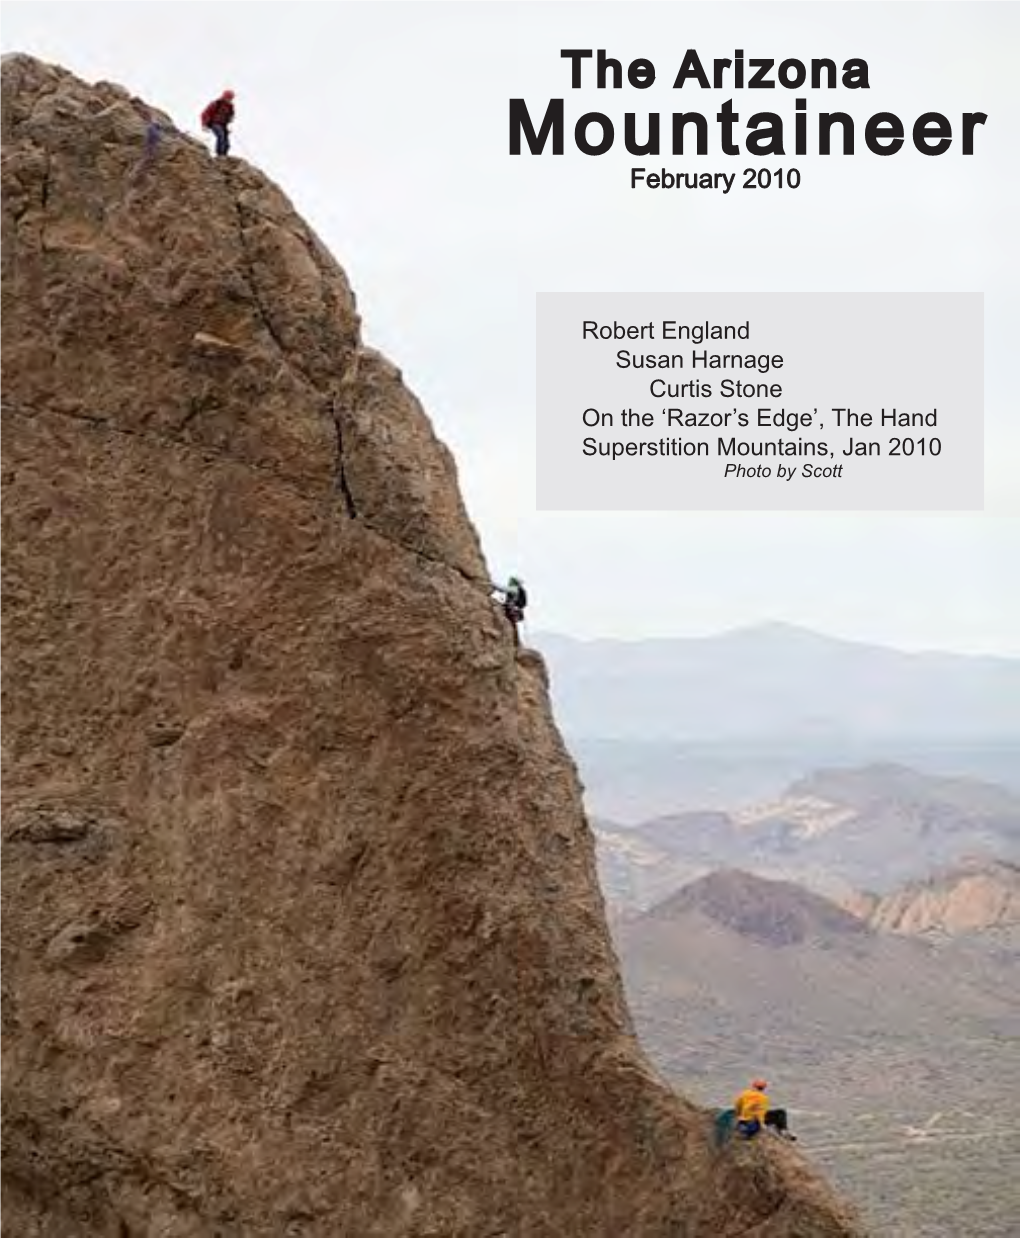 Climbers Can Join the Access Fund by Mailing an Annual, Tax-Deductible Donation of $35 Or More To: the Access Fund, P.O